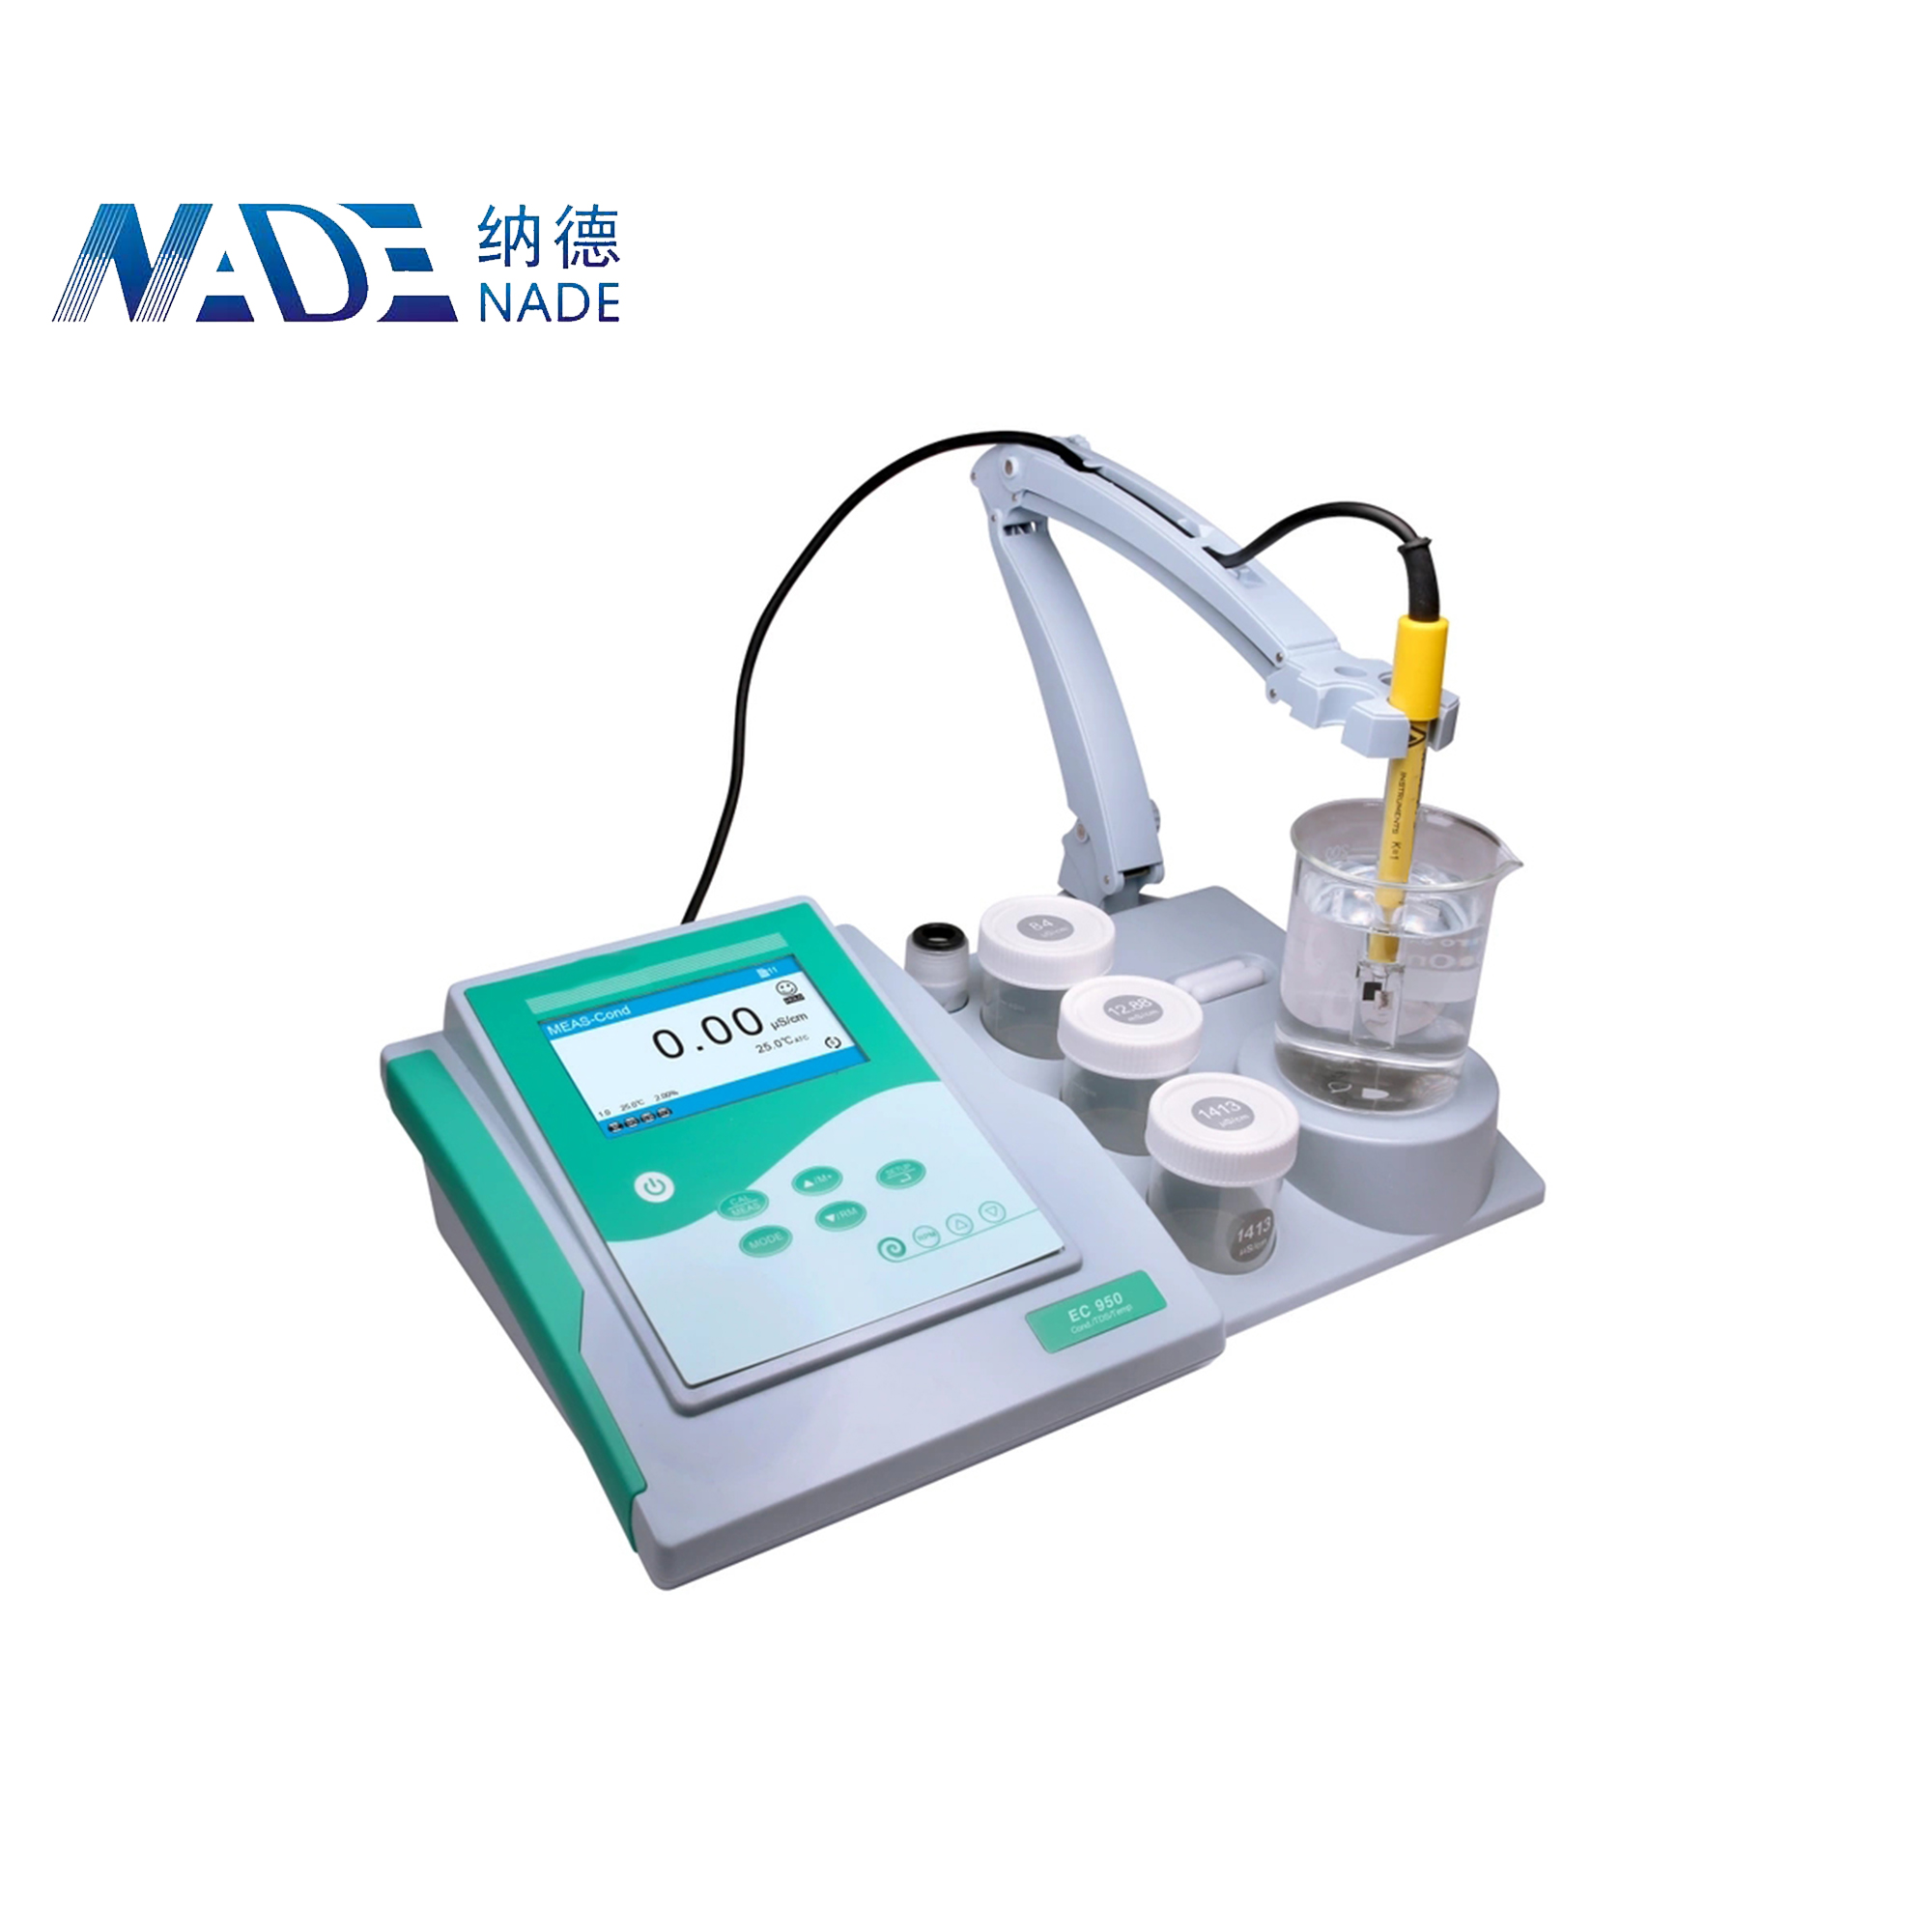 NADE EC950 Benchtop Conductivity Meter 0-200.0mS/cm and for TDS/Salinity/Resistivity/Temp.